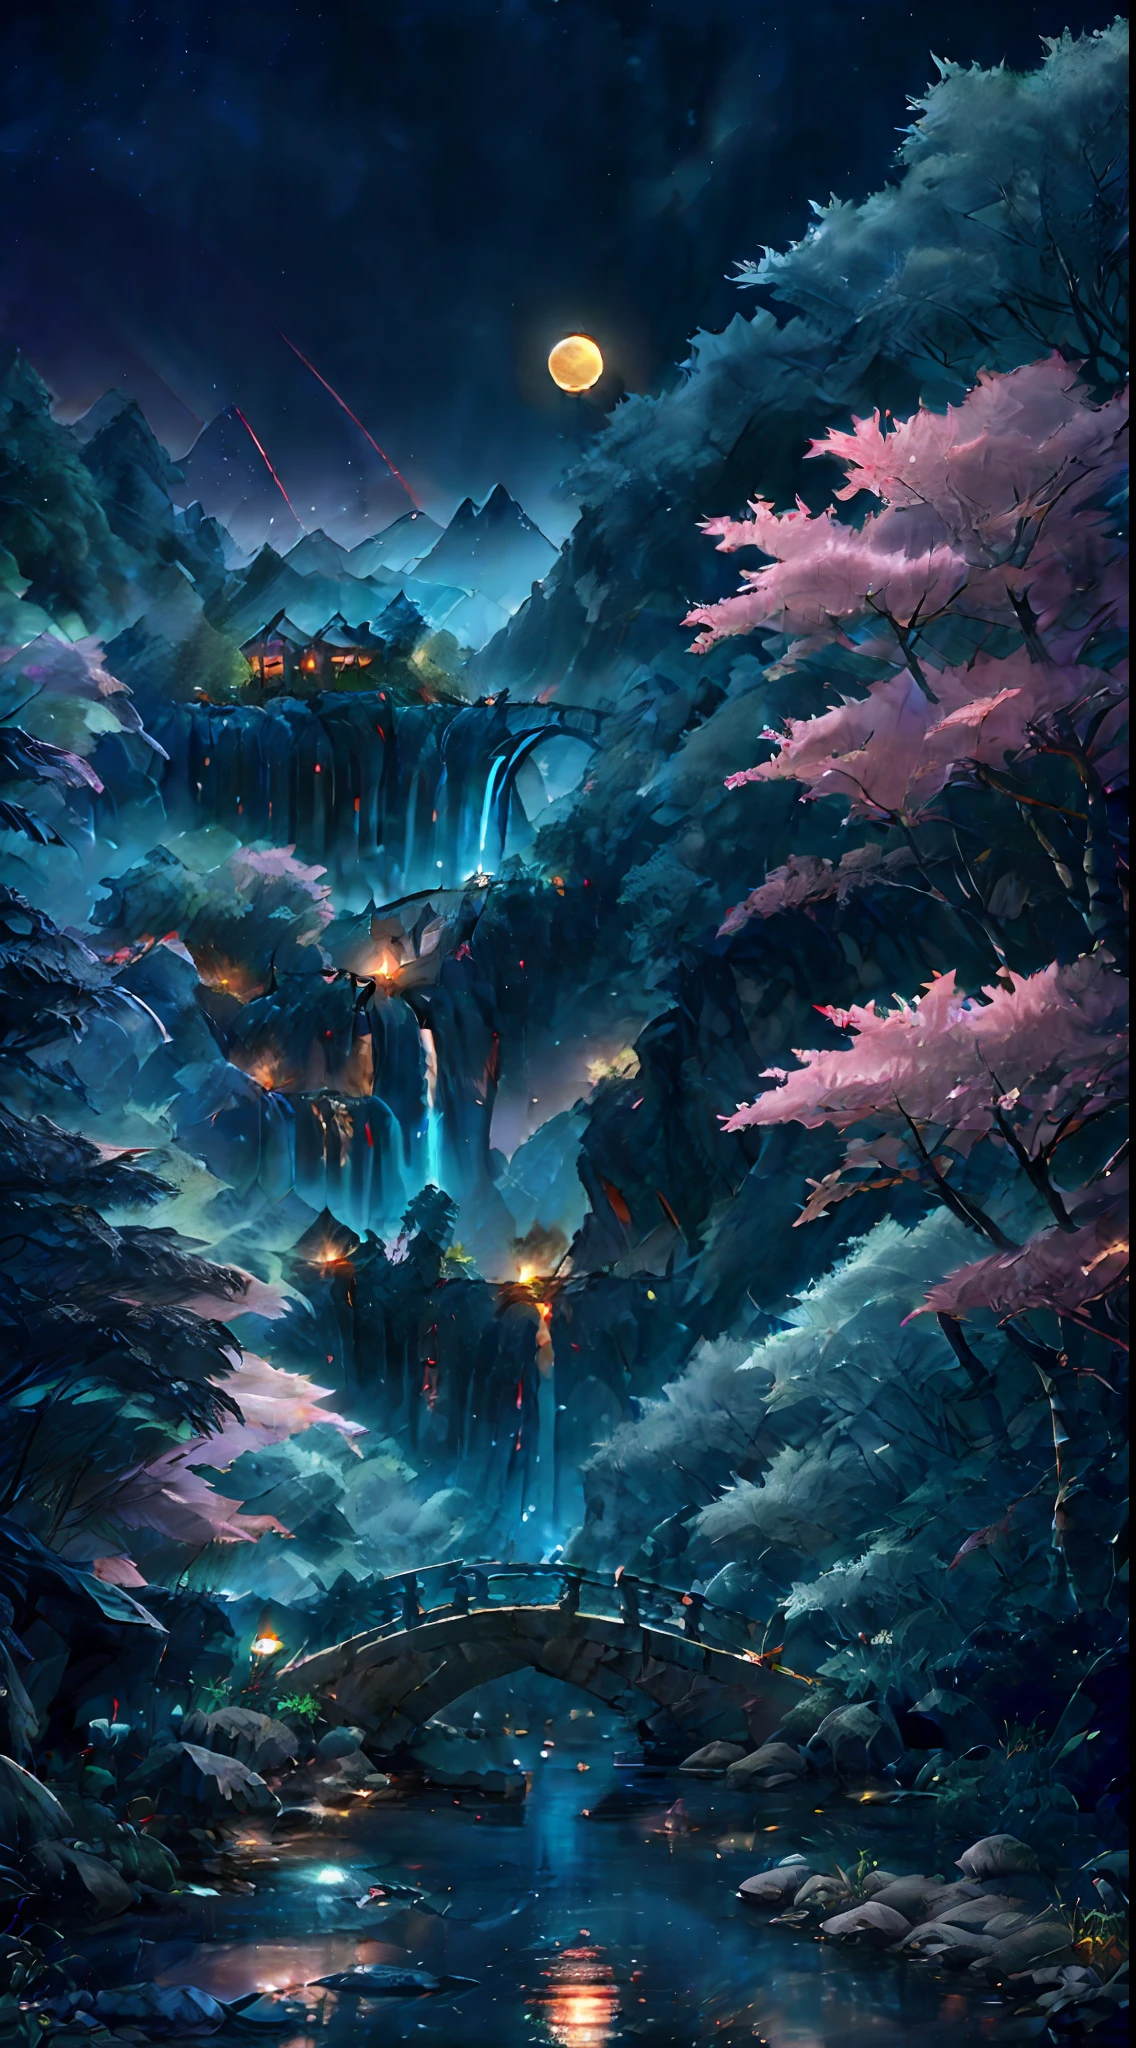 ((diffuse colors)), (( Top view, high angle view, Focal point composition)), Ancient Chinese architecture, cool colors, dark night, moon, garden, bamboo, lake, stone bridge, rockery, arch, corner, tree, running water, landscape, outdoor, waterfall, grass, rock, intense rainfall, thunderstorm, vines all around, giant and wet trees, with glowing leaves in the trees, glowing fireflies and glowing particle effects, masterpiece, best quality, high quality, extremely detailed CG unity 8k wallpaper, oil paiting, award winning photography, Bokeh, Depth of Field, HDR, bloom, ,Photorealistic,extremely detailed, trending on artstation, trending on CGsociety, Intricate, High Detail, dramatic, art by midjourney, volumetric lighting